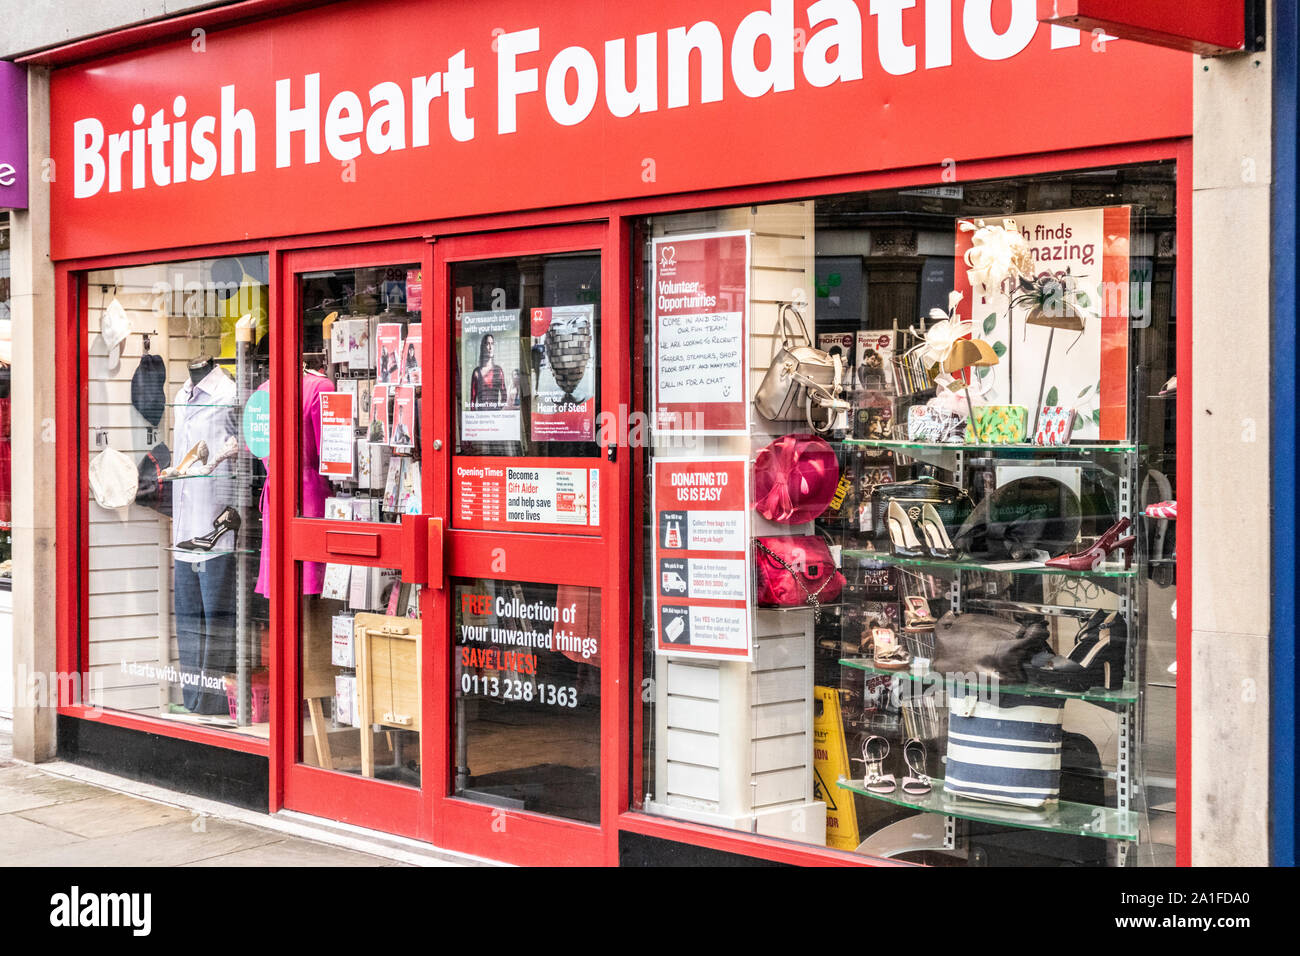 The British Heart Foundation charity shop in Morley, Leeds, West Yorkshire UK Stock Photo